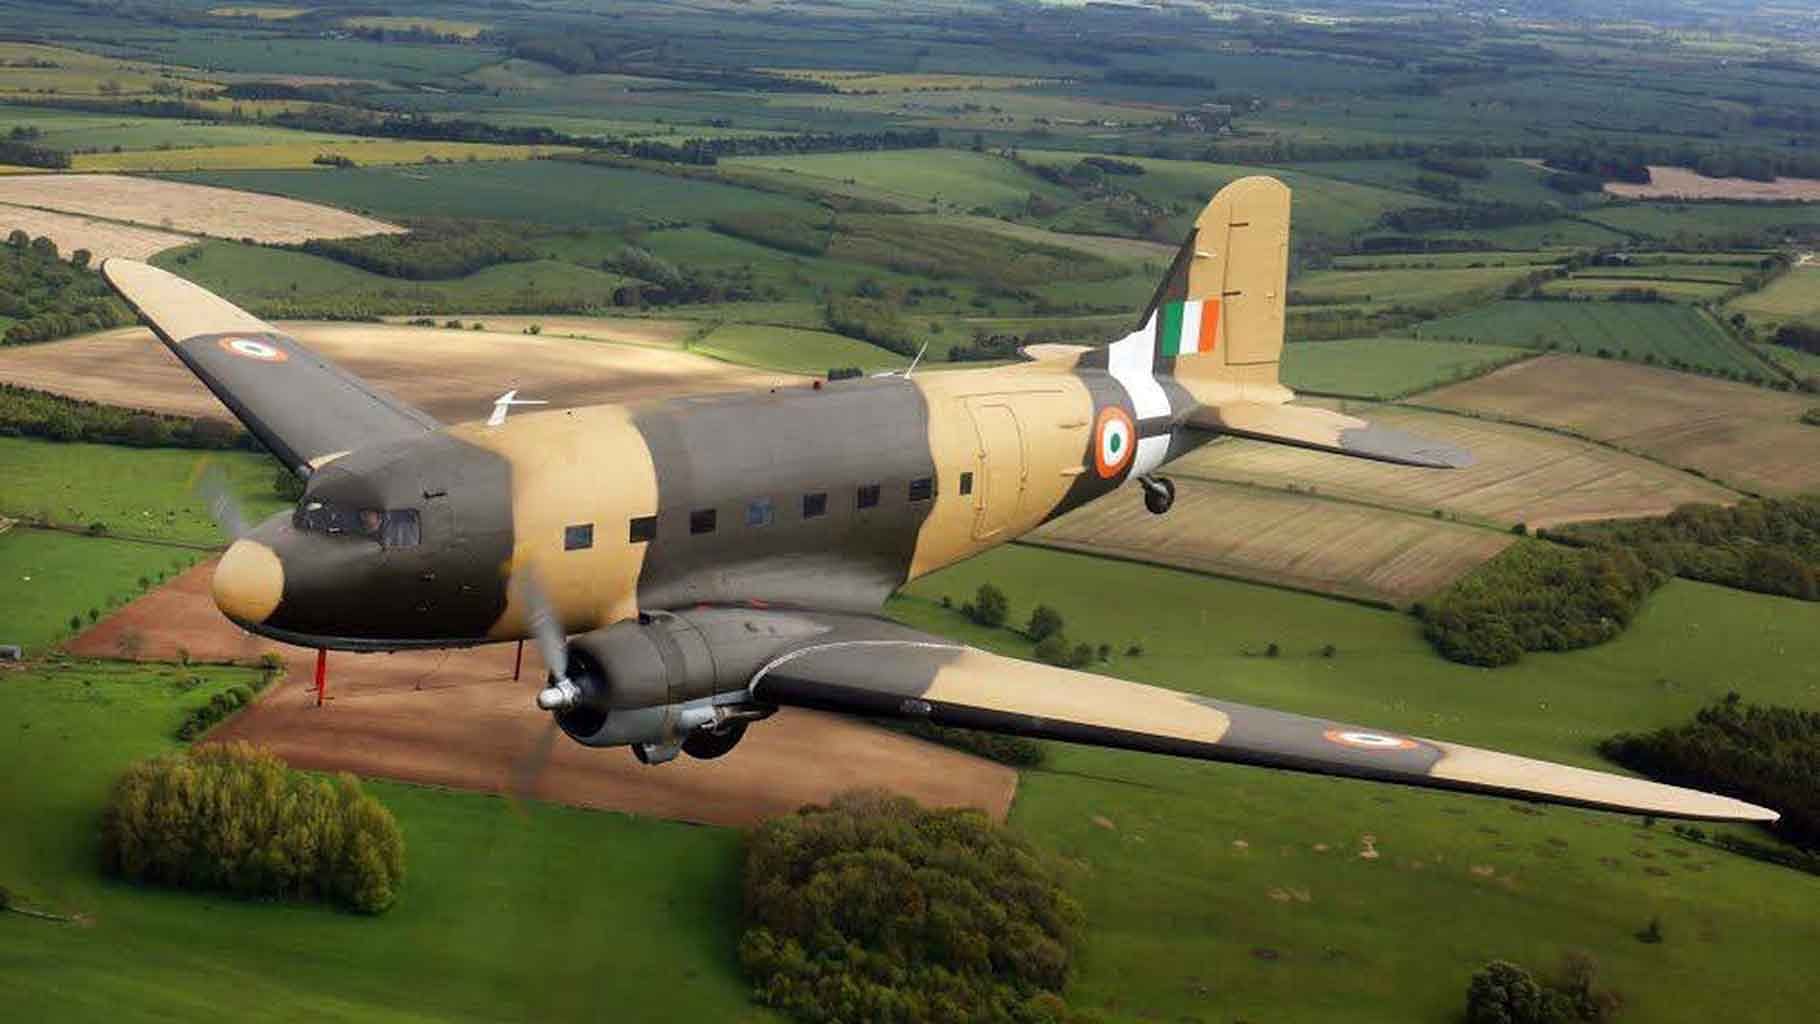 DC3s flew extensively during World War II and participated in the Indo-Pak and Indo-China conflicts (Photo: <a href="http://rajeev.in/">Rajeev Chandrashekhar</a>)